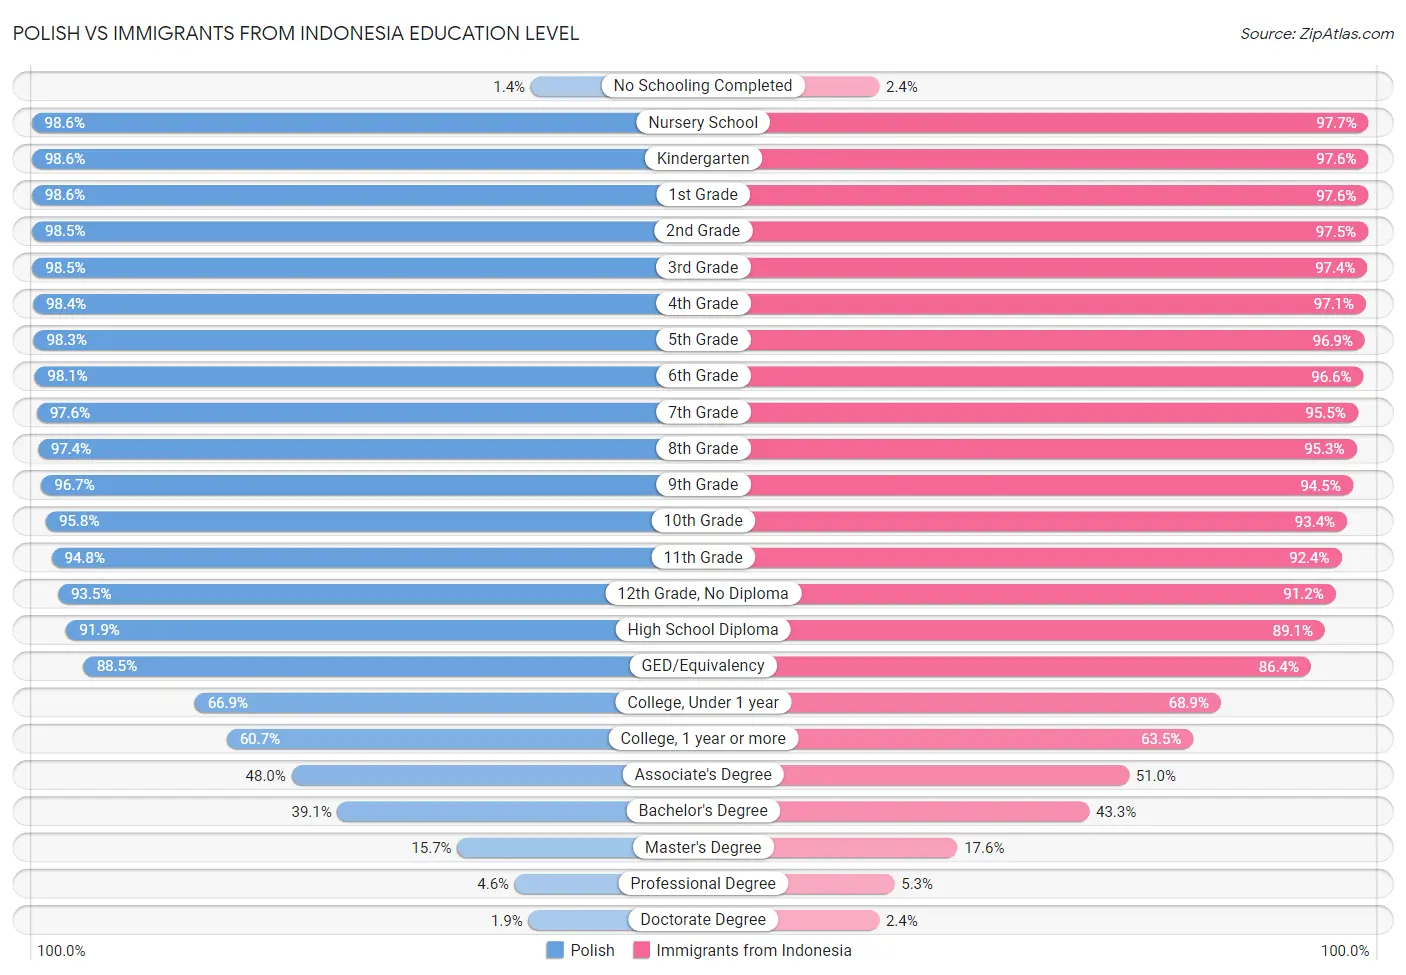 Polish vs Immigrants from Indonesia Education Level